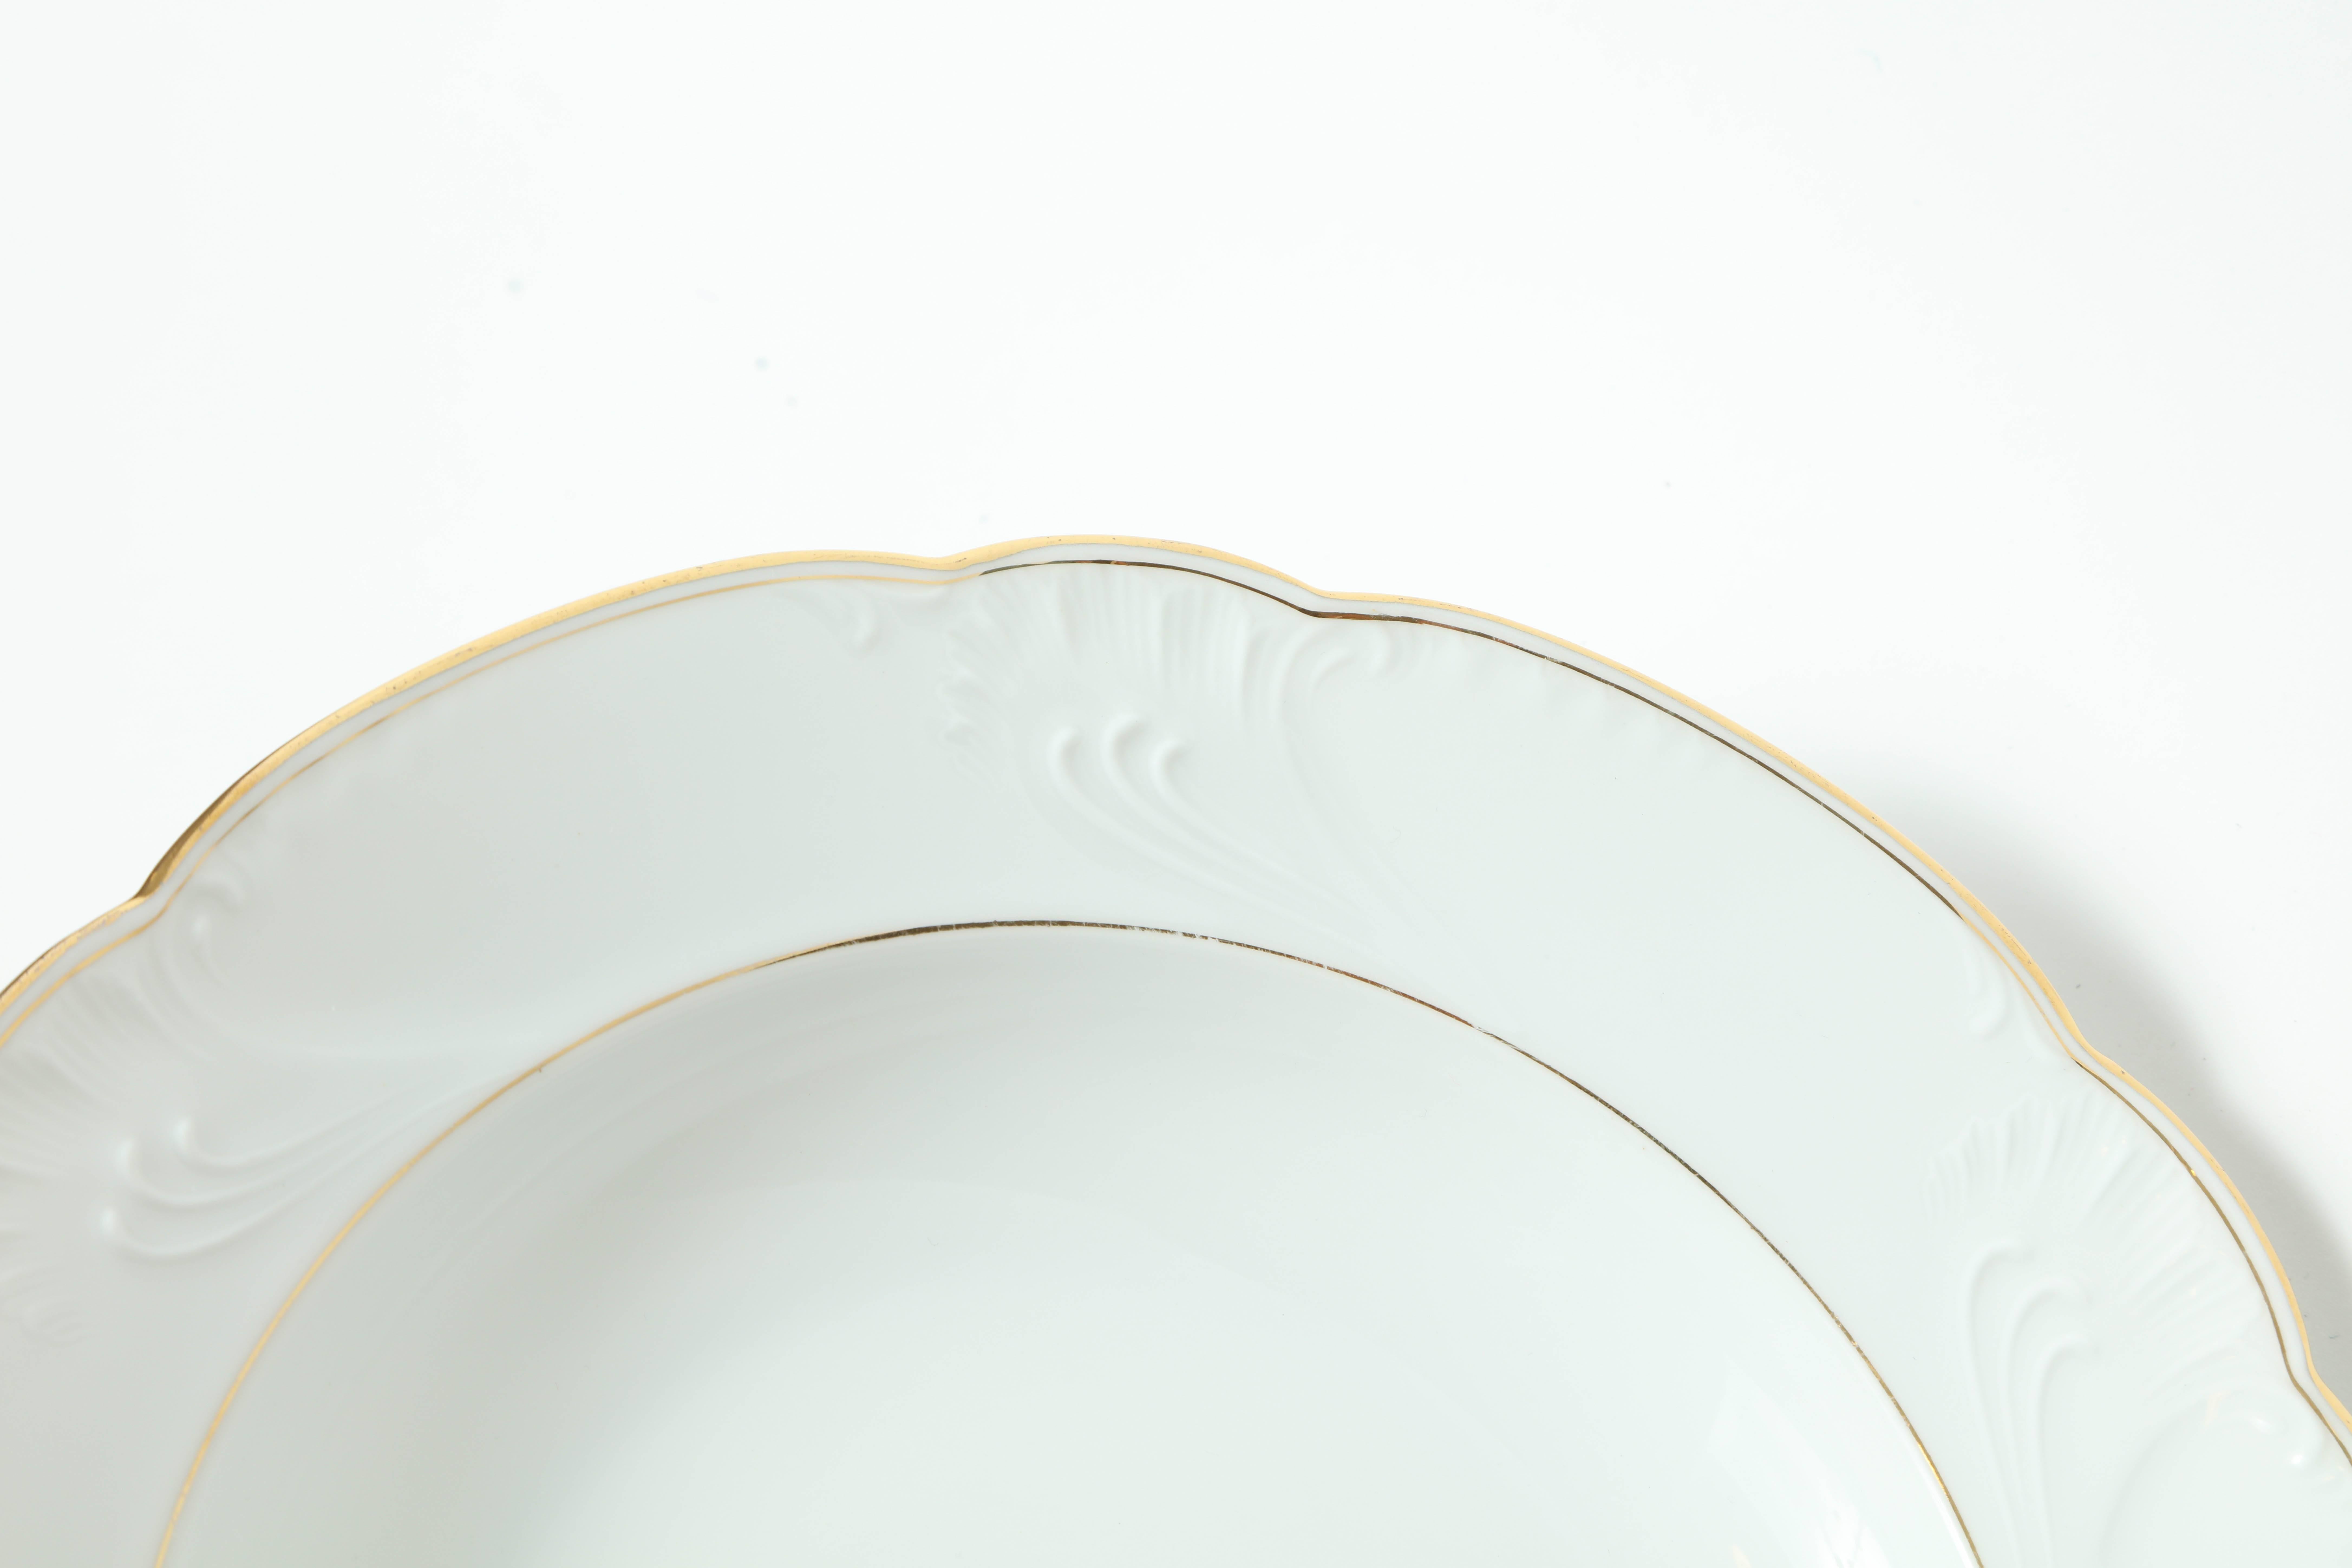 Set of eight porcelain rimmed soup bowls with a scalloped edge and gilt borders.
Marked Praddatz & Co, Berlin on underside.